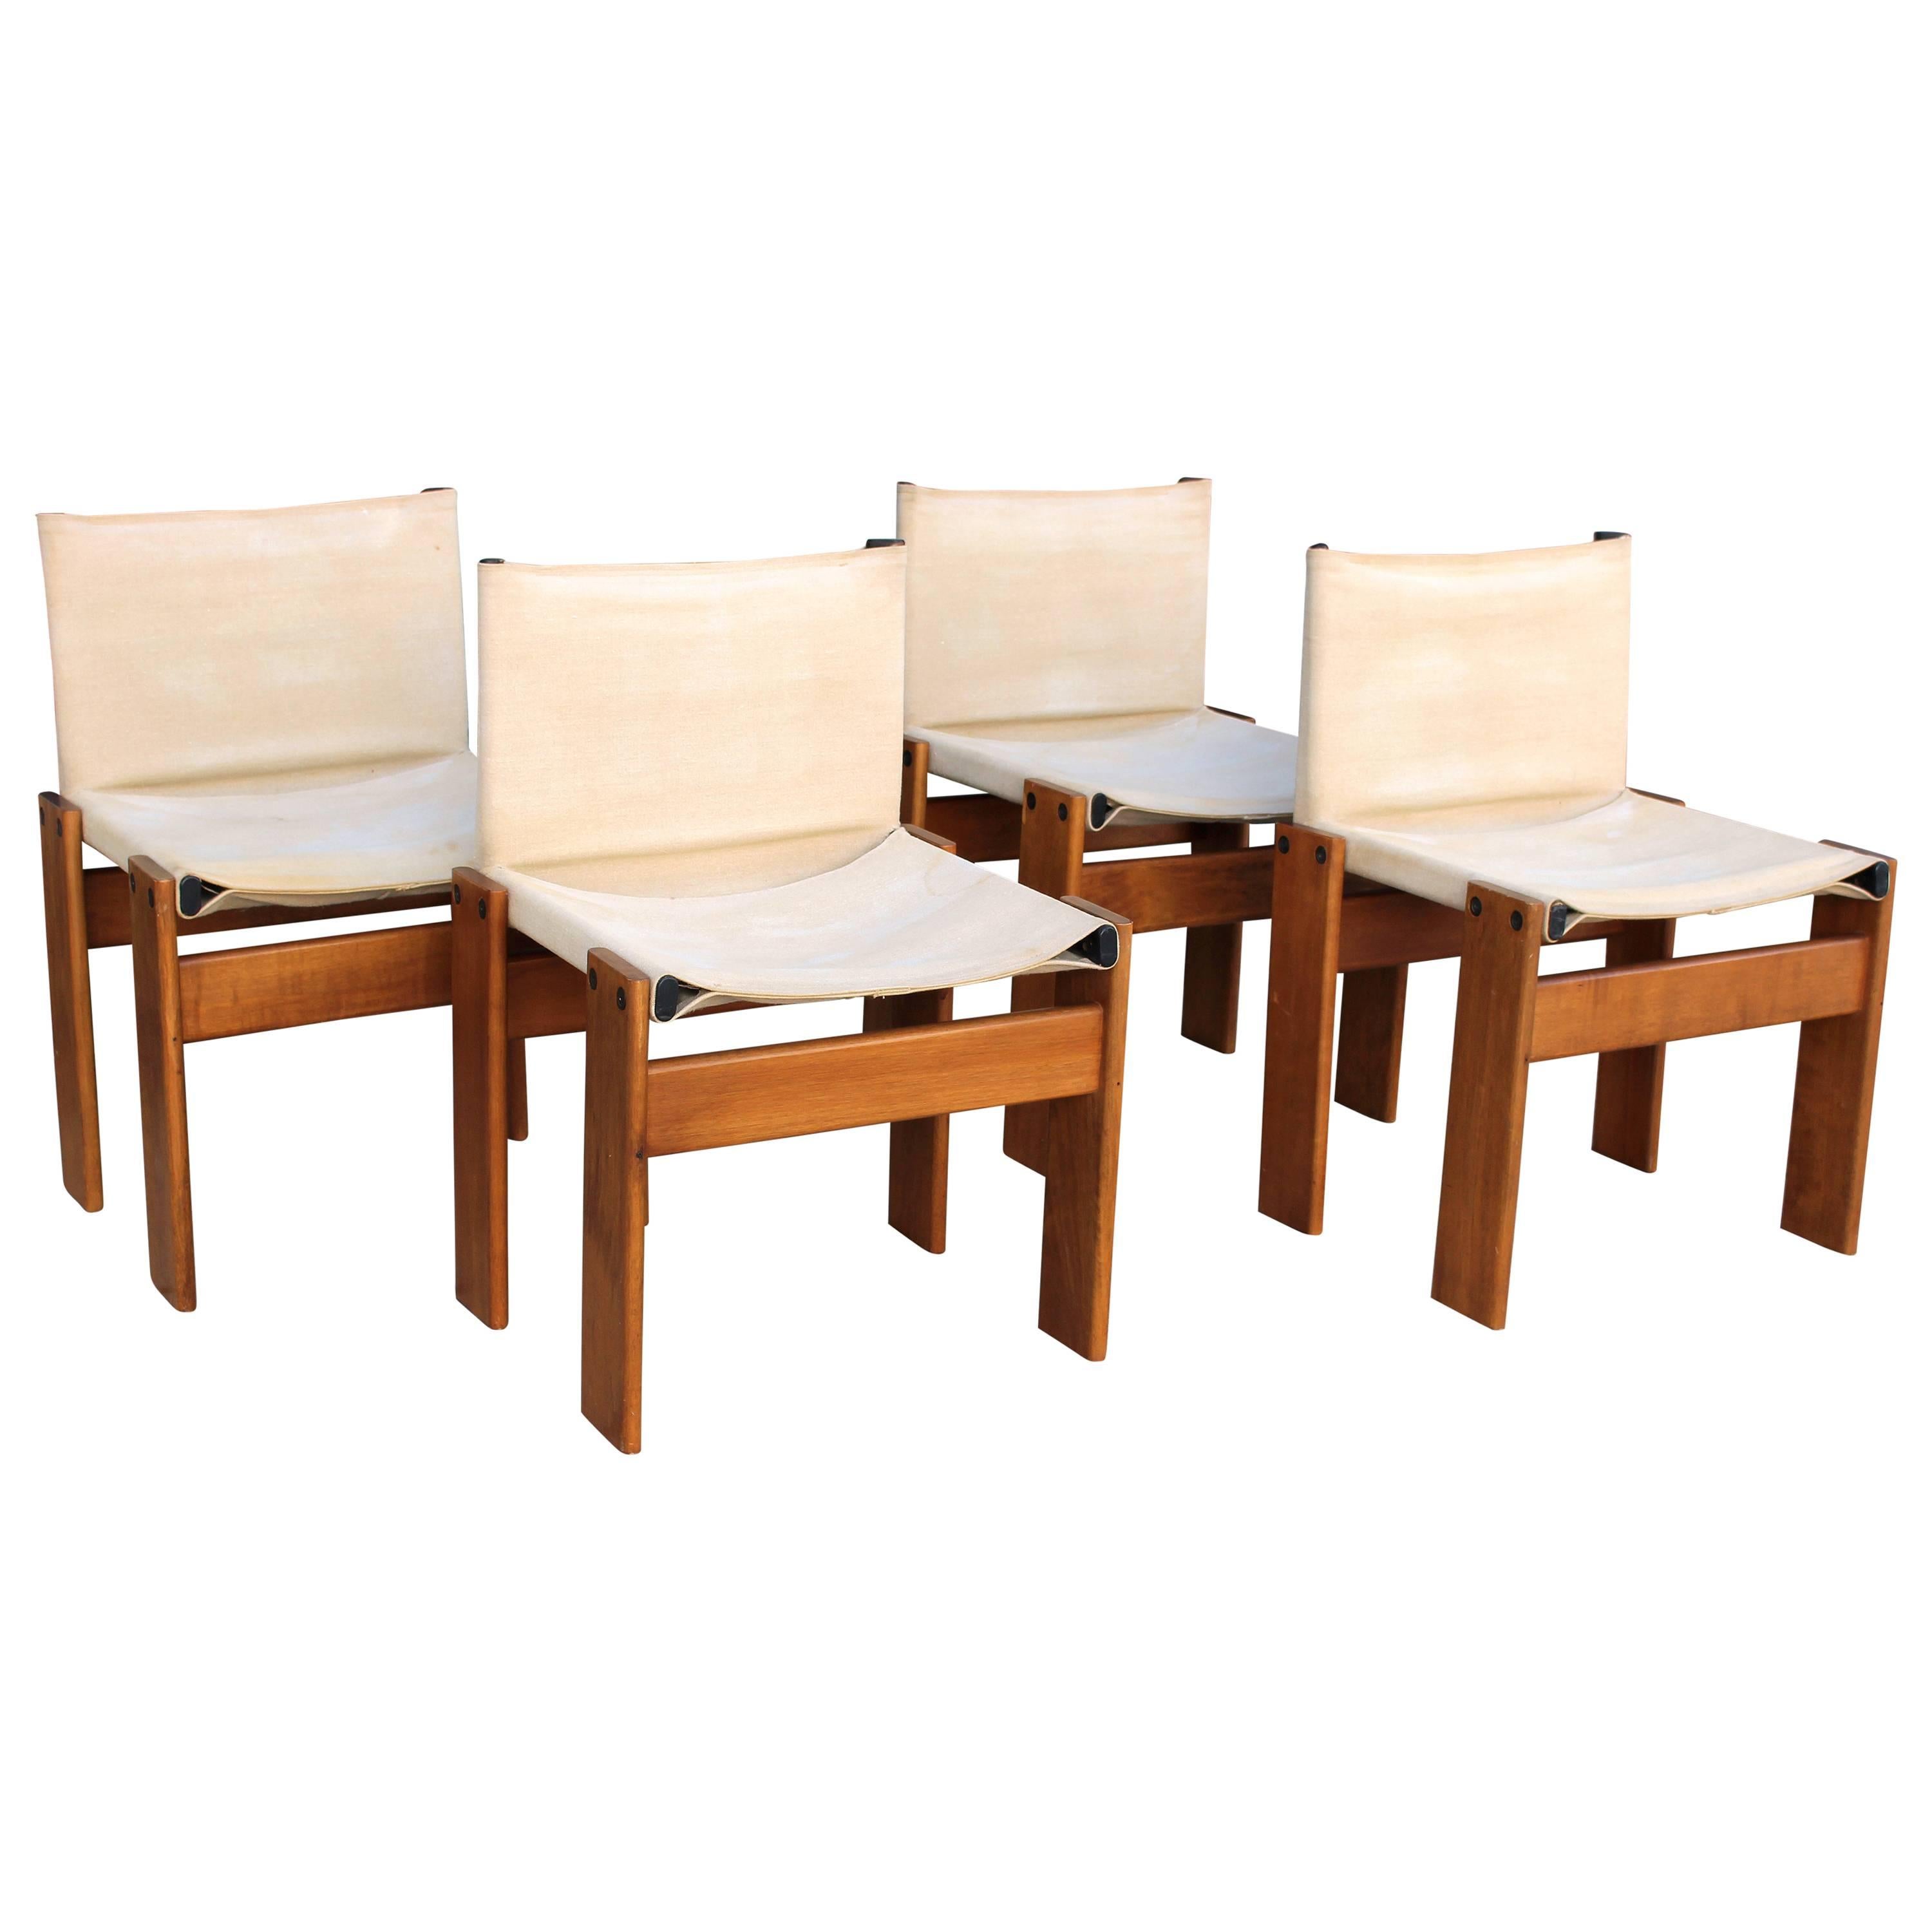 Italian Set of Four "Monk" Chairs Designed by Afra & Tobia Scarpa